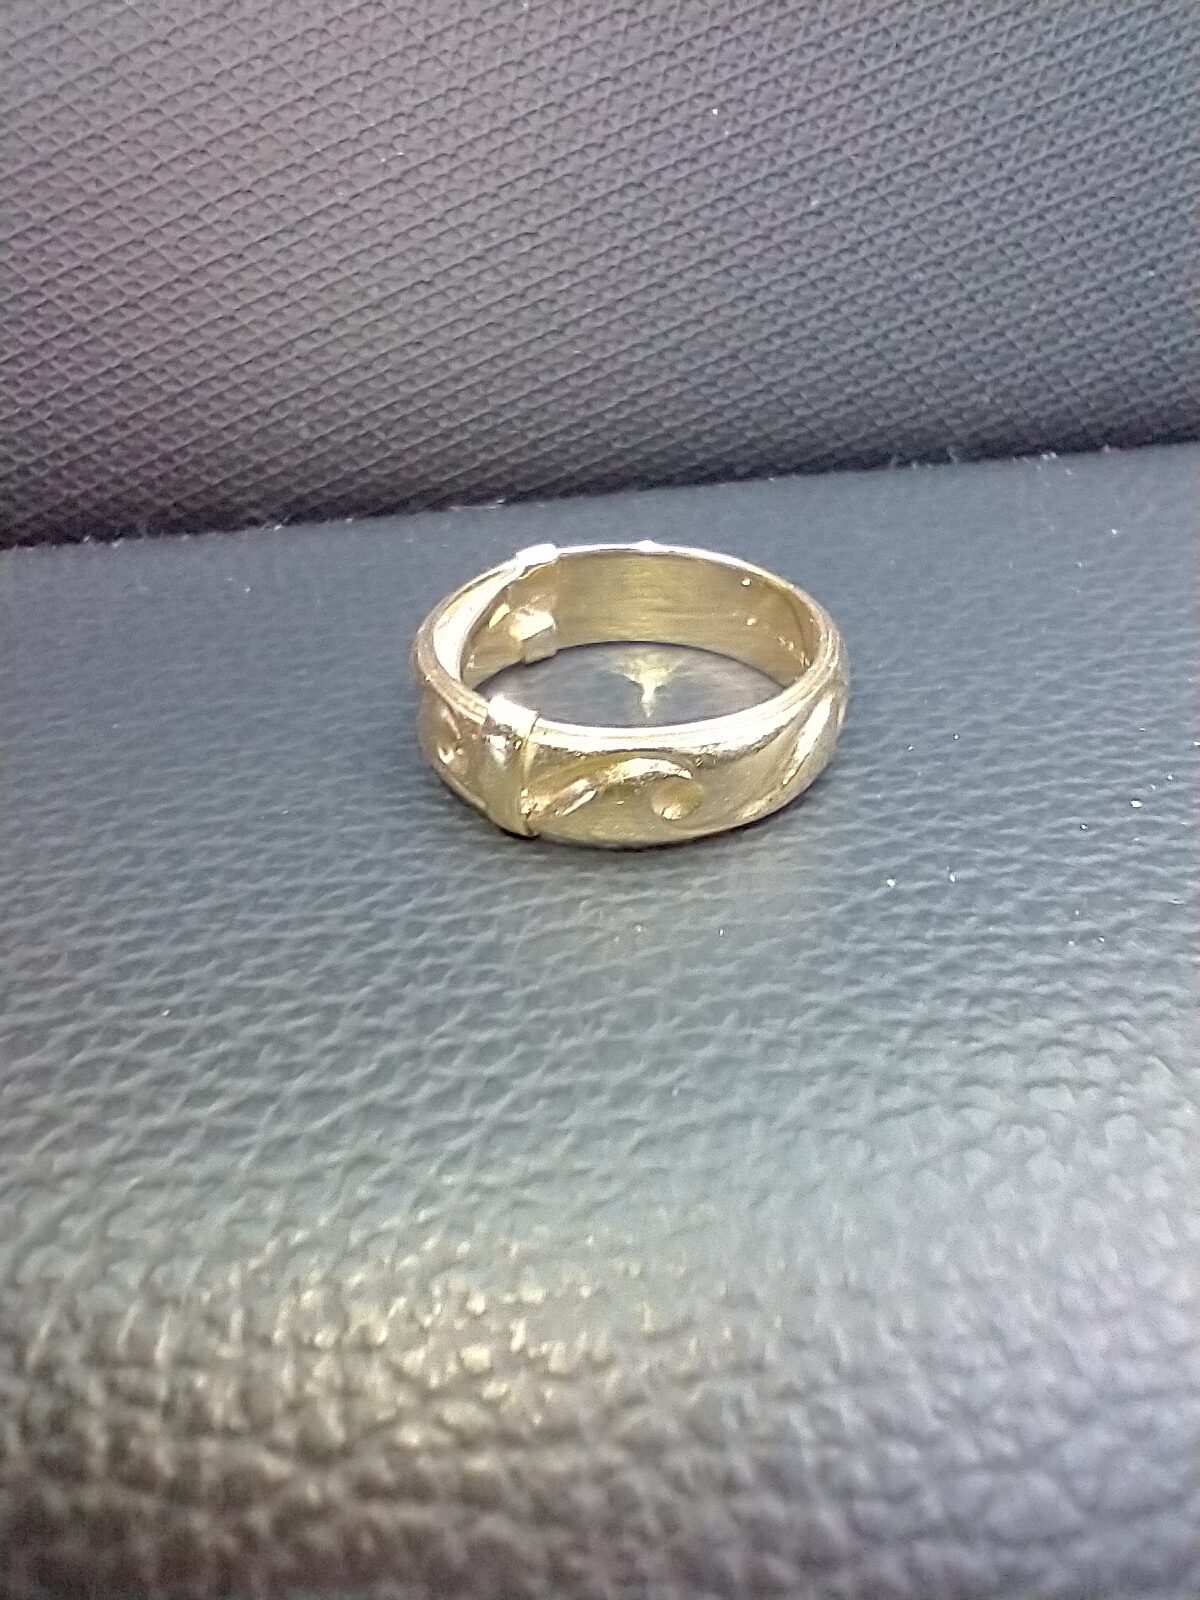 Ring Lost On Holmes Beach, Recovered By SRARC